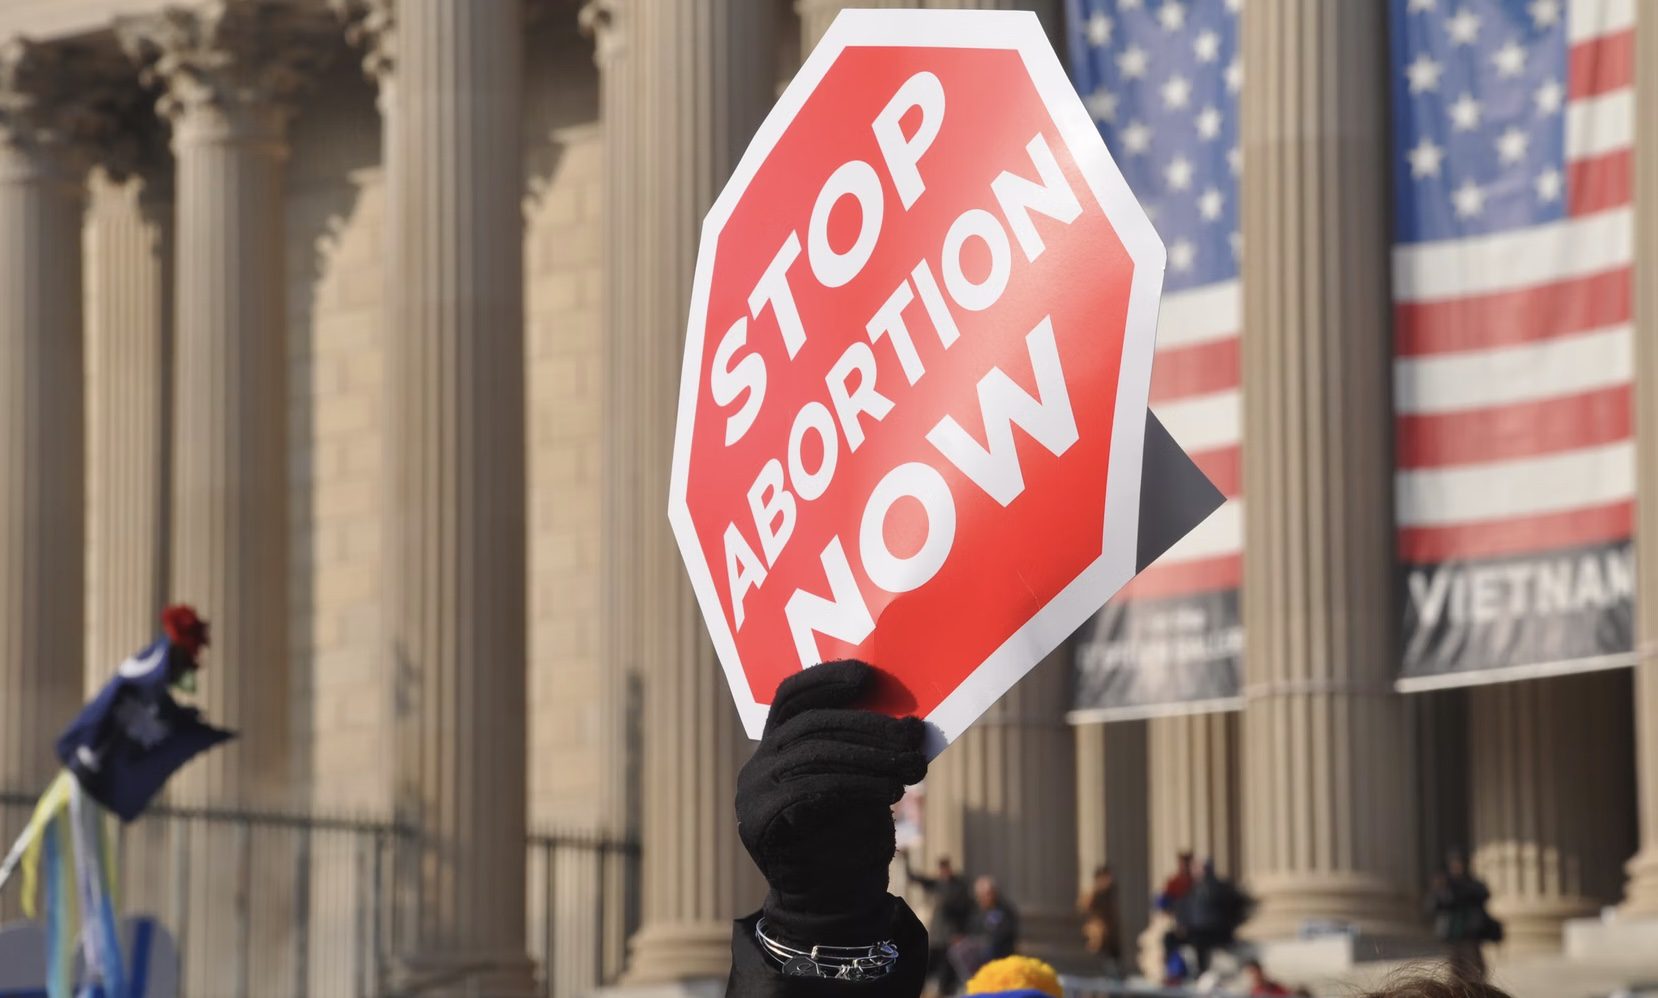 Georgia Supreme Court Reinstates Ban on Abortions After Six Weeks of Pregnancy | The Gateway Pundit | by Cassandra MacDonald